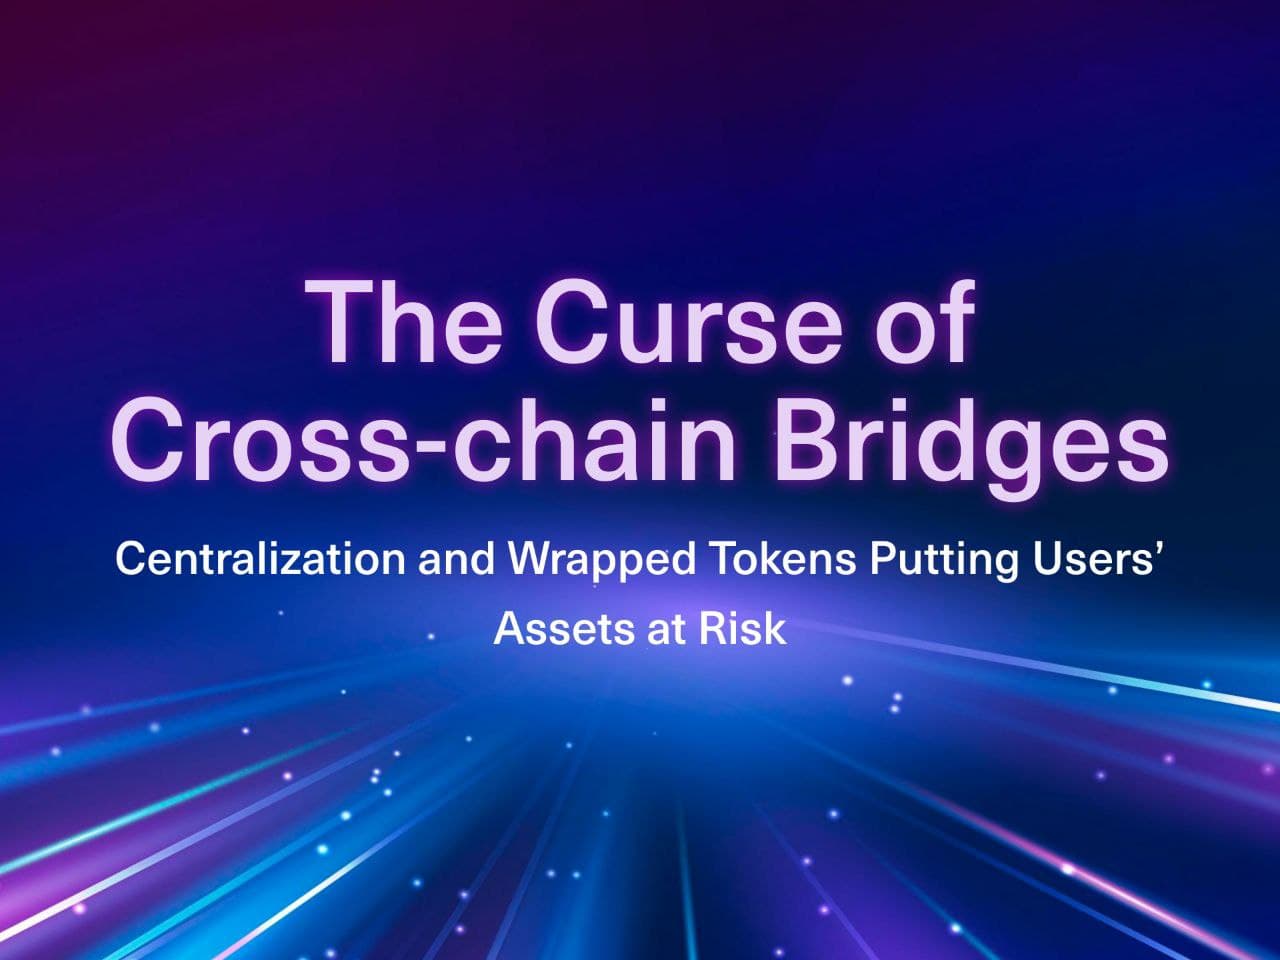 The Curse of Cross-chain Bridges: Centralization and Wrapped Tokens Putting Users’ Assets at Risk